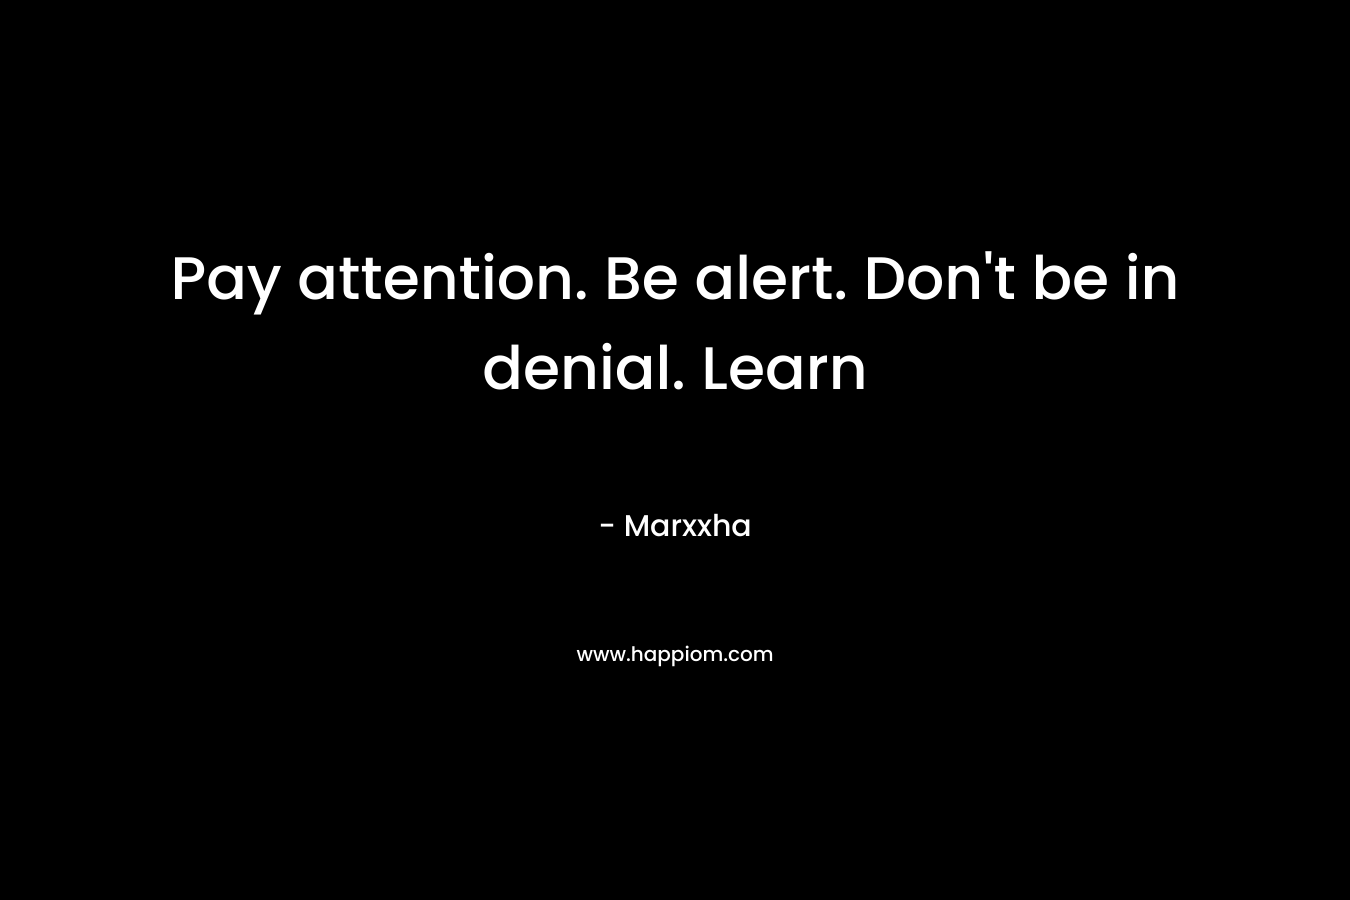 Pay attention. Be alert. Don't be in denial. Learn